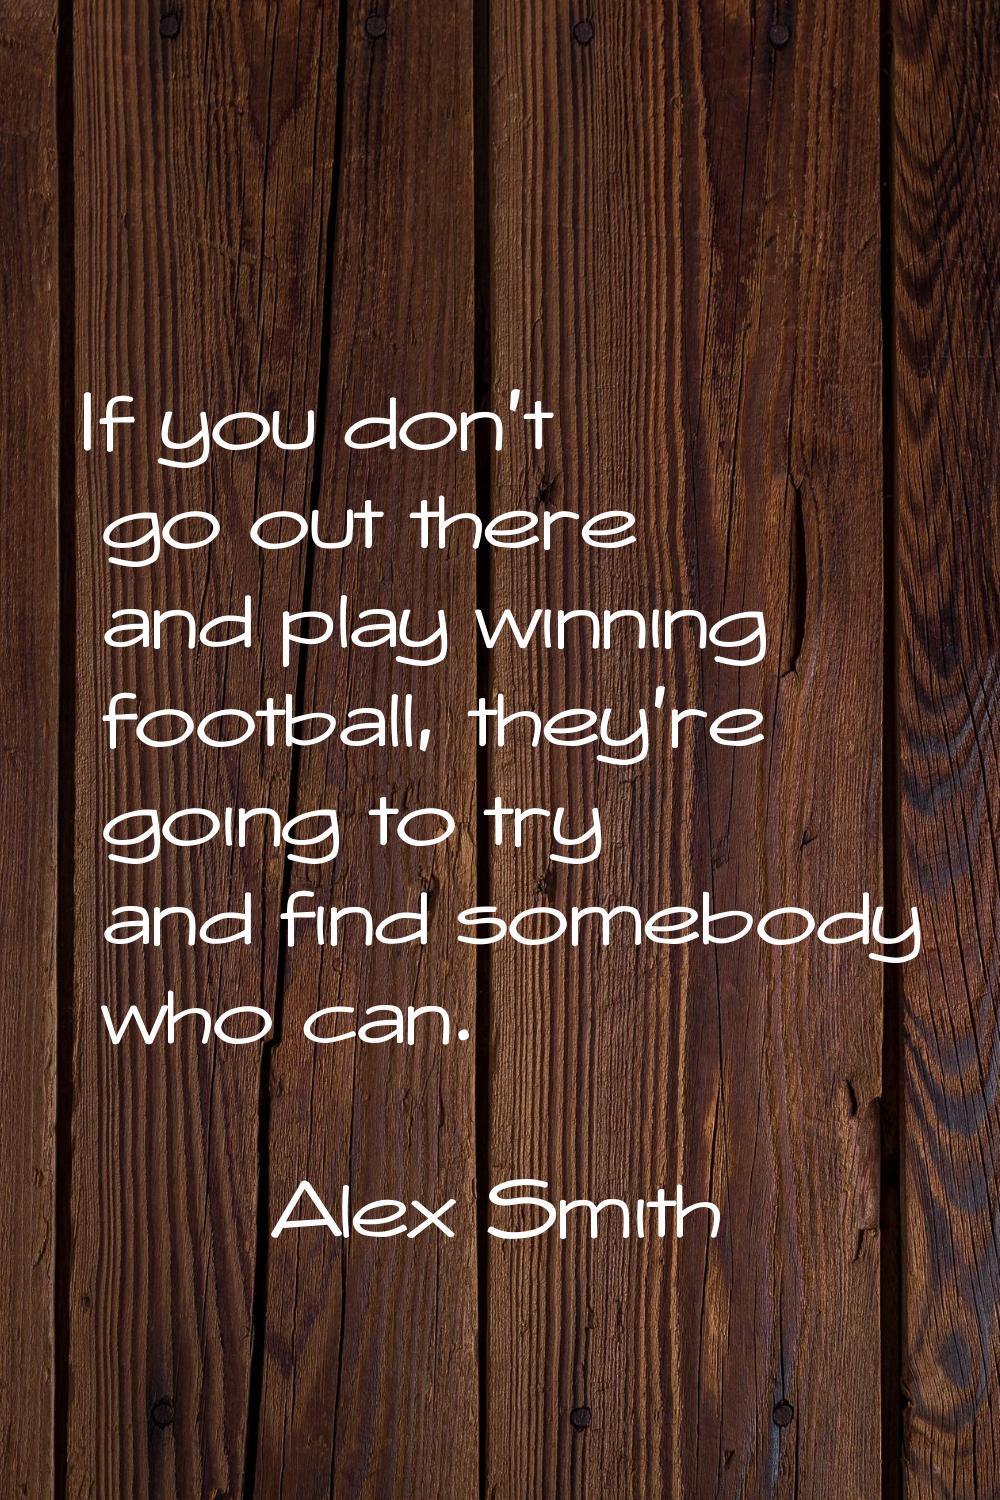 If you don't go out there and play winning football, they're going to try and find somebody who can